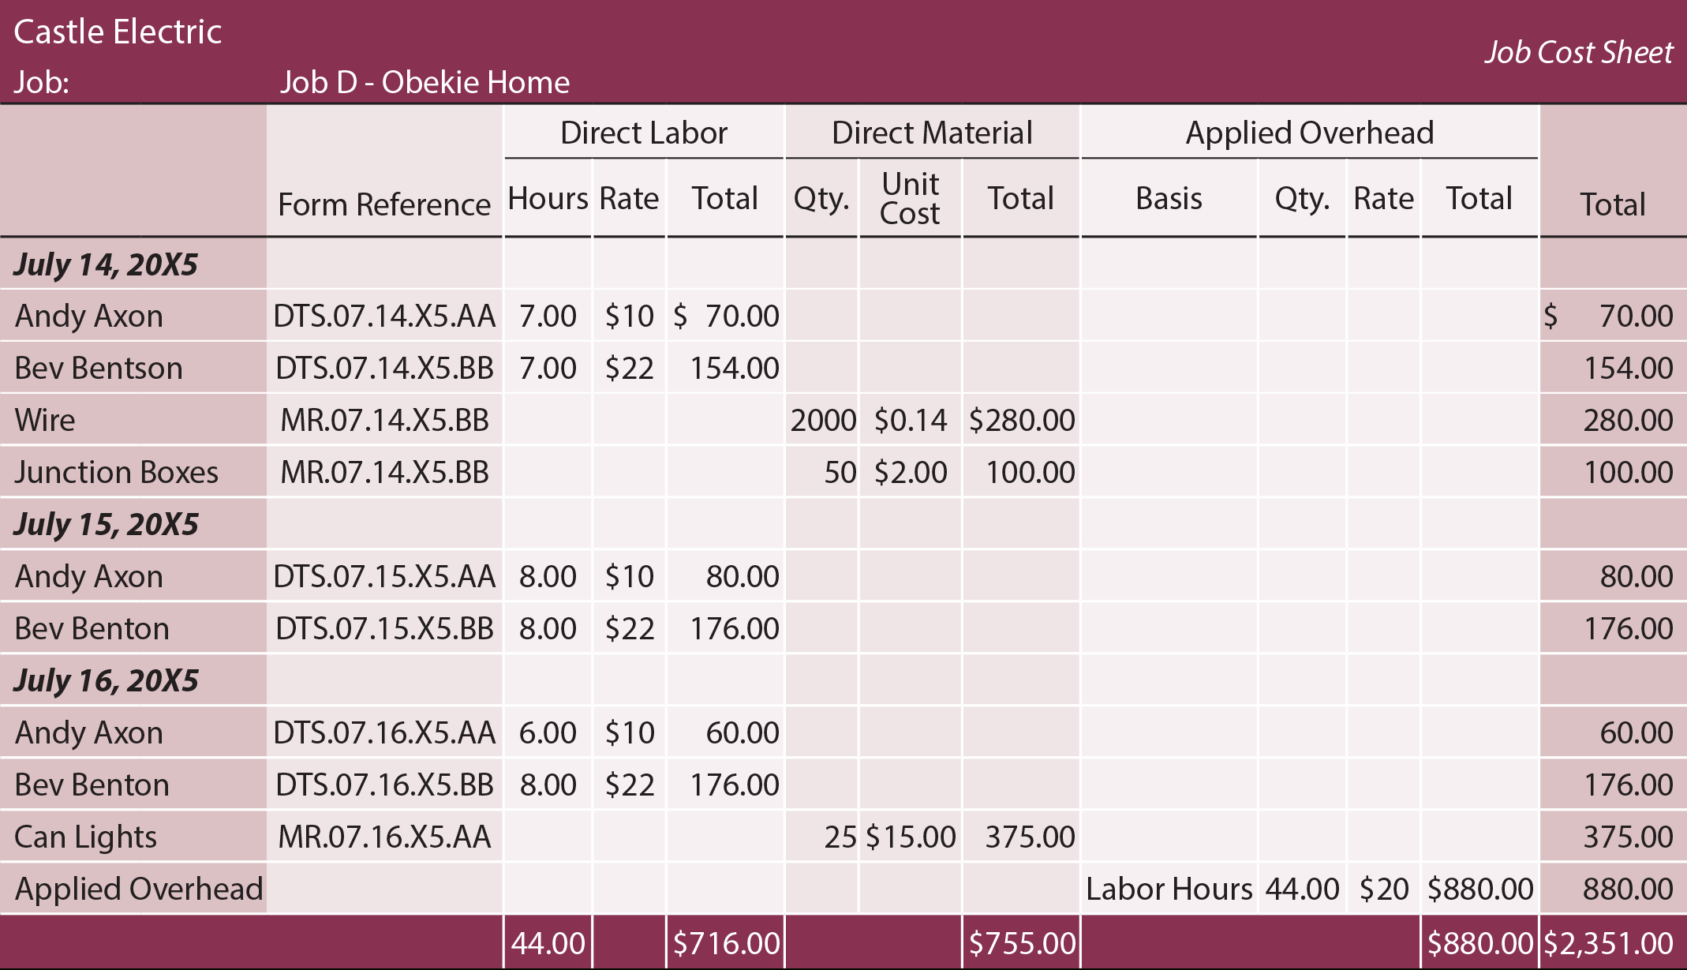 Job Cost Analysis Spreadsheet within Job Costing Concepts